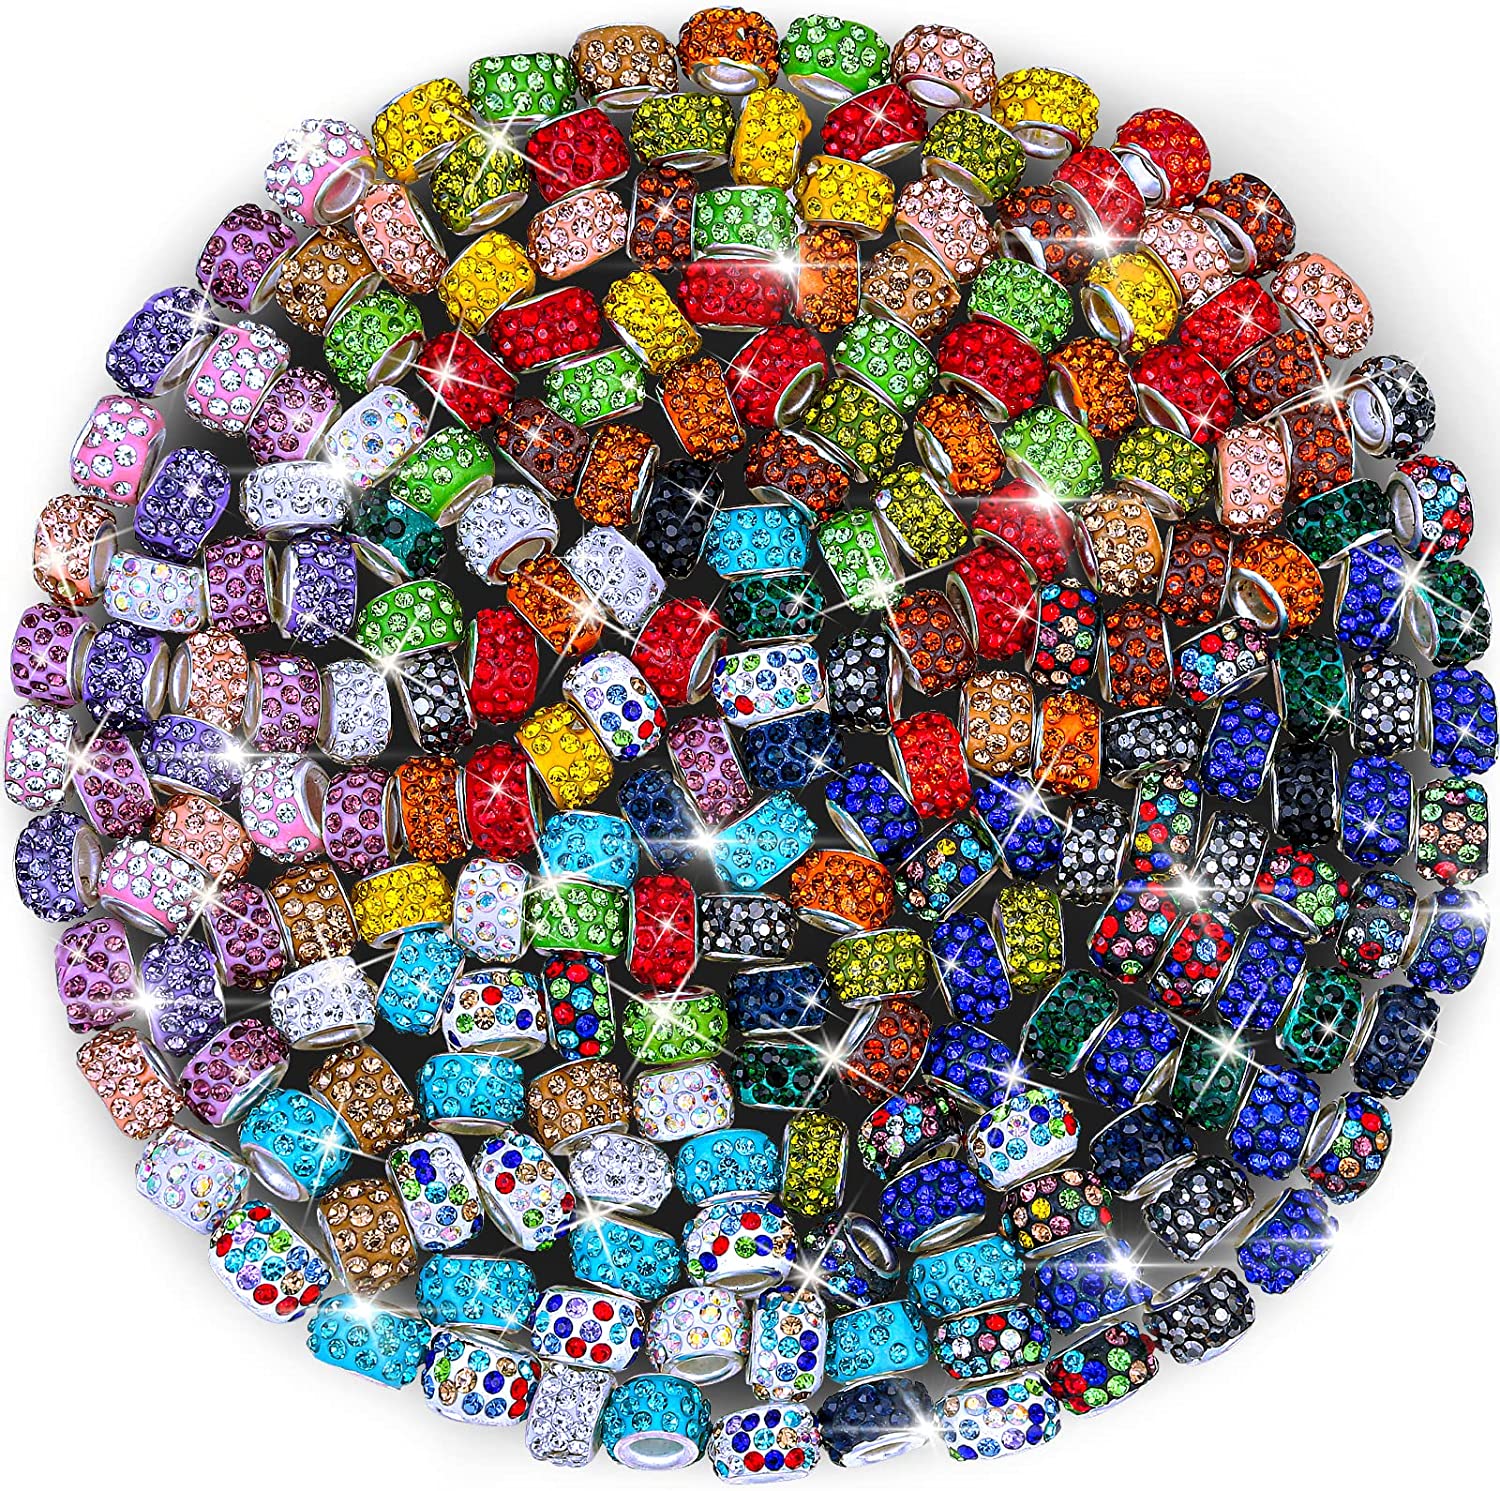 200 PCS European Beads Bulk for Jewelry Making,Cludoo Large Hole Beads  Spacer Beads with Mixed Color Rhinestone Charms Beads for DIY Craft  Bracelet Necklace Earring Making